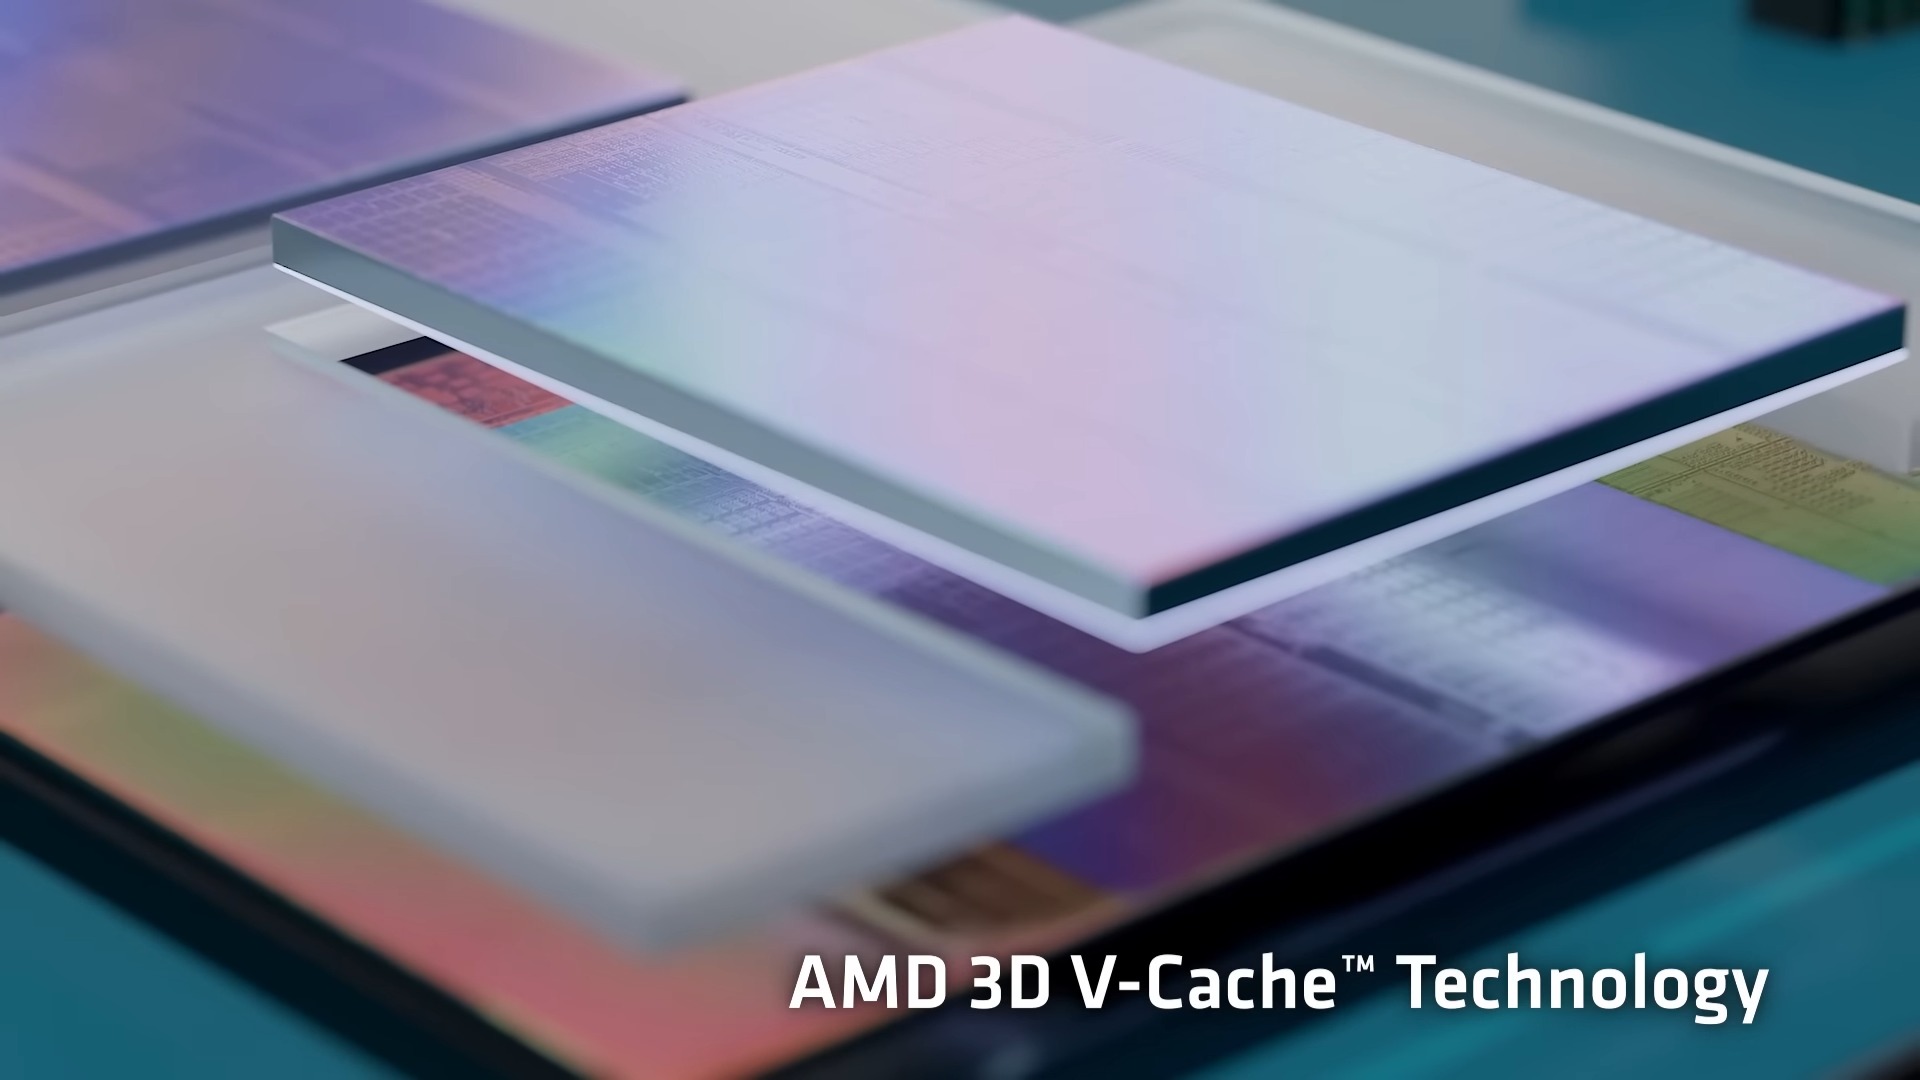 Modifying AMD 3D V-Cache Into RAM Disk Makes For Insane Benchmark Numbers